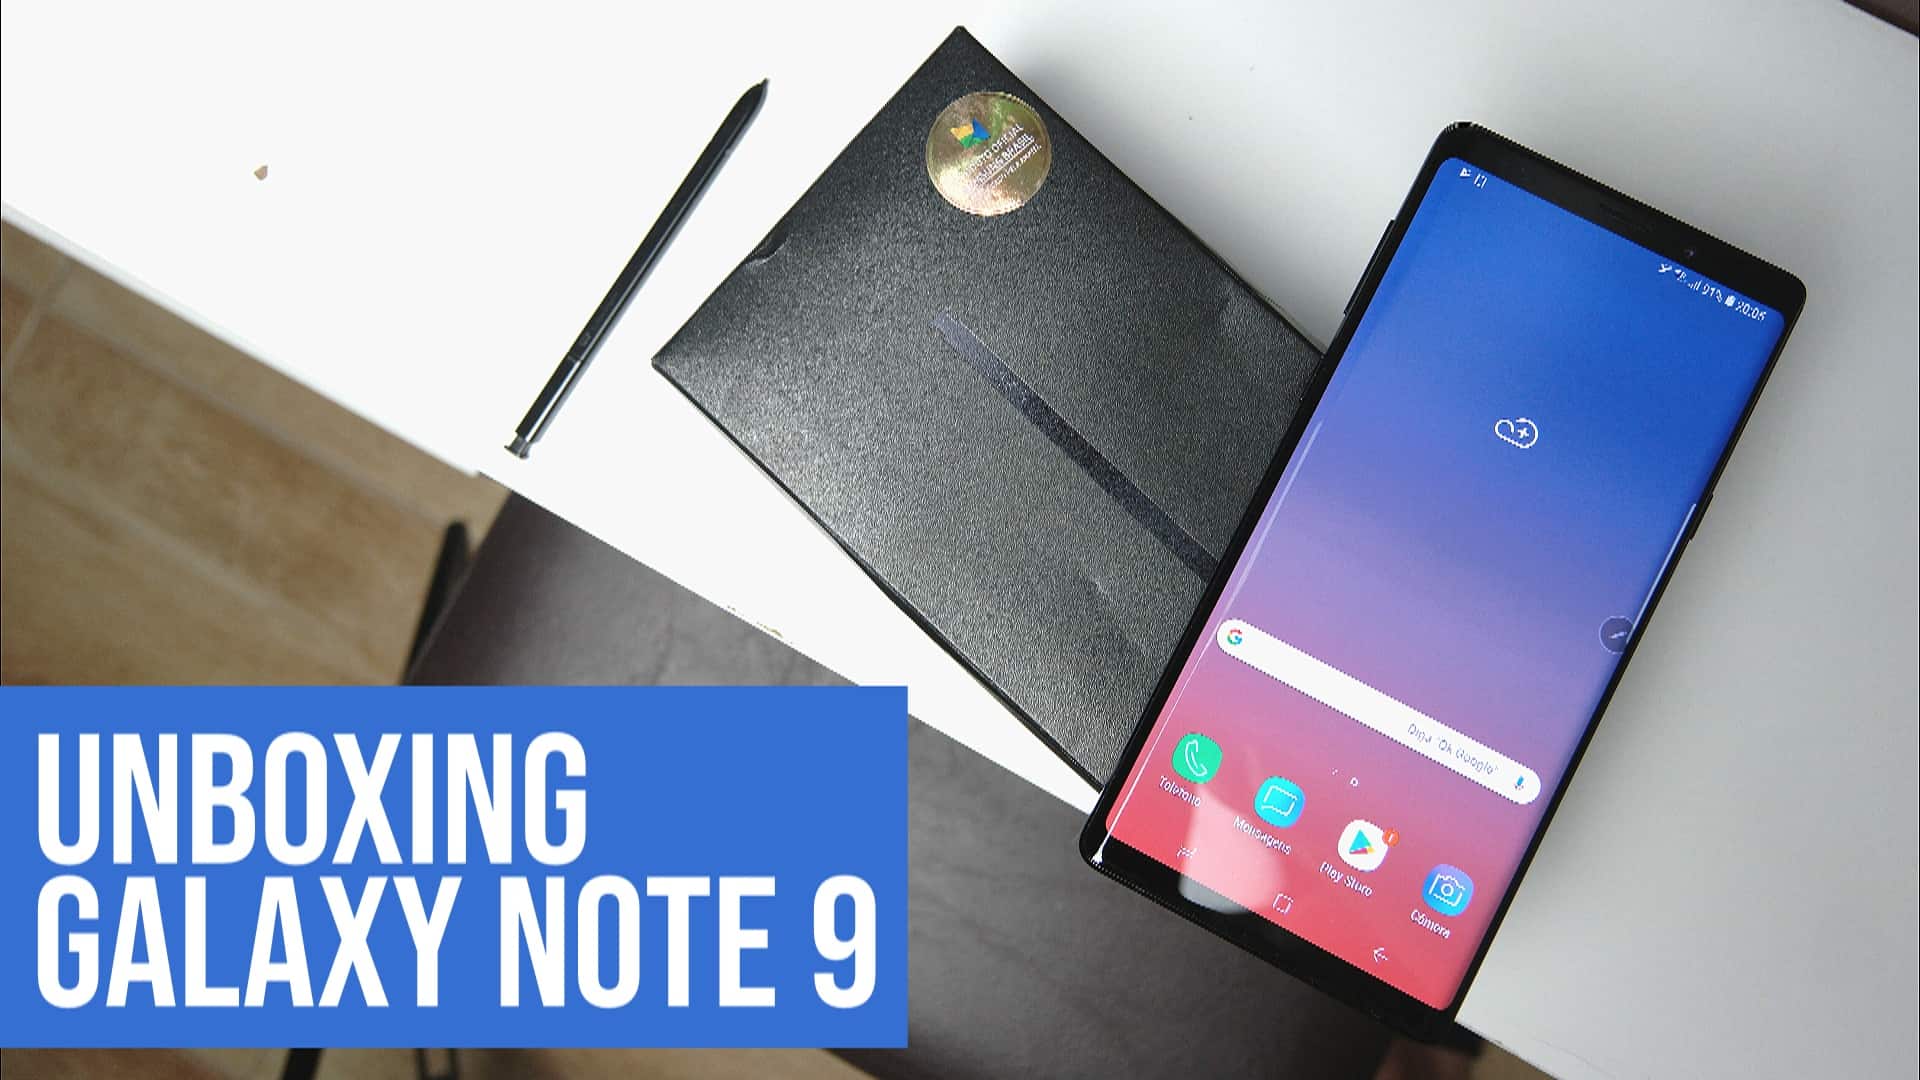 [Vídeo] Unboxing do Samsung Galaxy Note 9 6